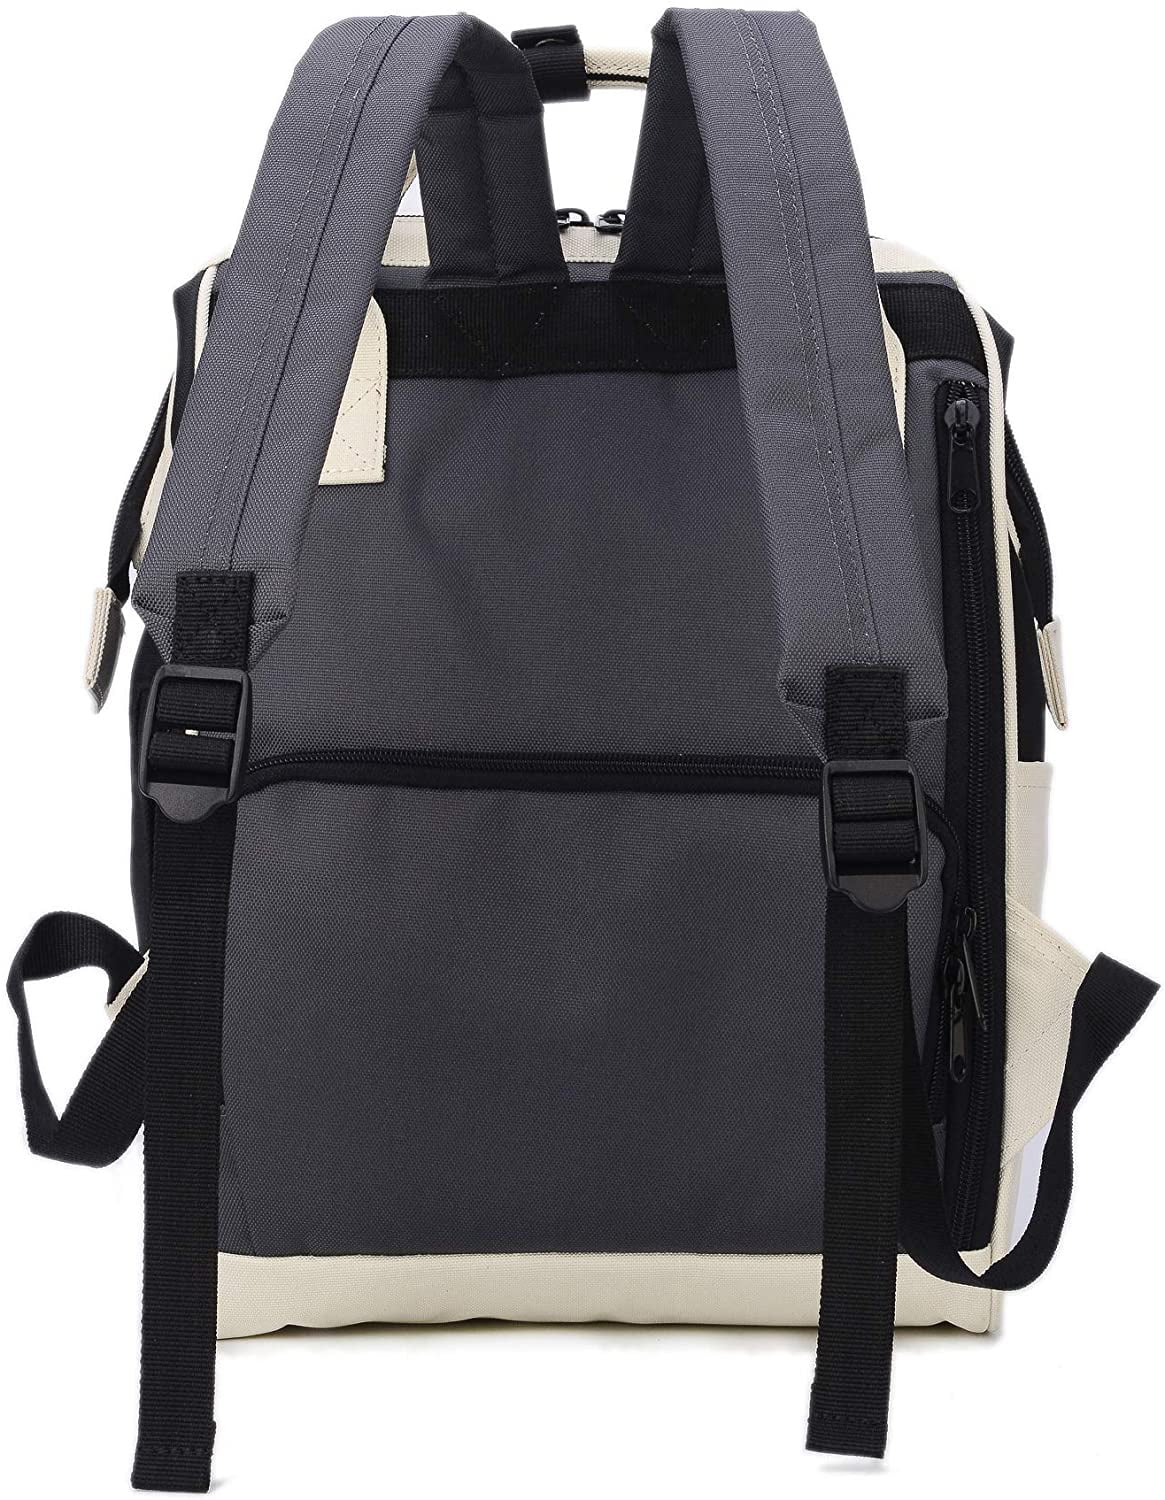 Kah&Kee Polyester Backpack Functional Anti-Theft Travel Bags for Men ...